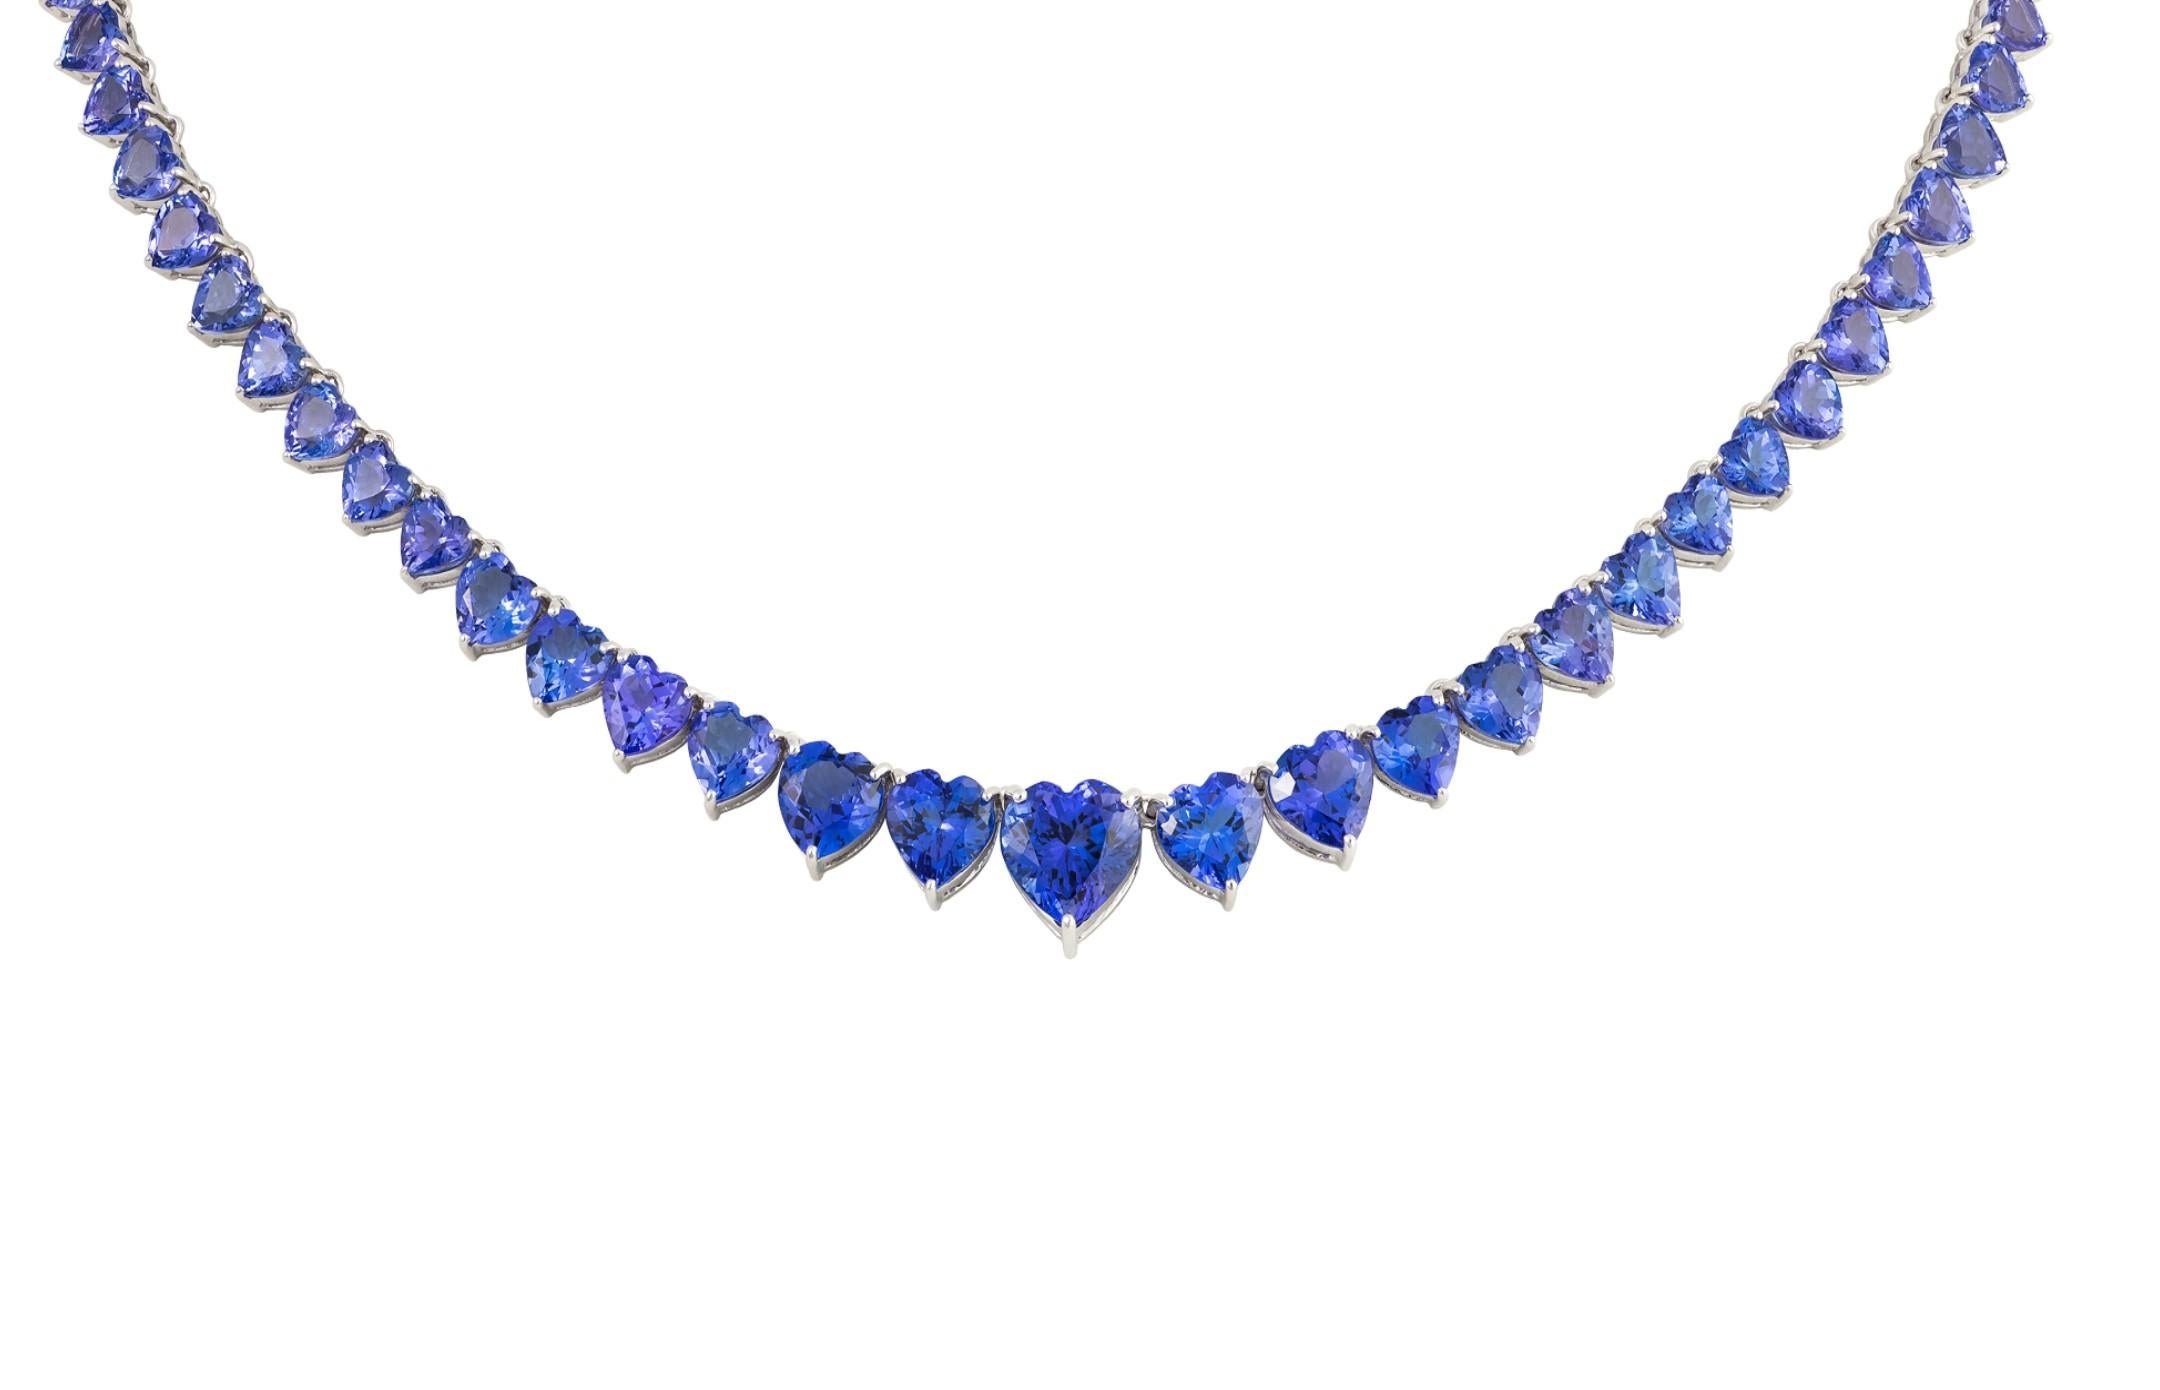 The Following Item we are offering is a Rare Important Spectacular and Brilliant 18KT Gold Large Gorgeous Graduated Tanzanite Heart Strand Necklace. Necklace consists of Rare Fine Magnificent Rare Heart Shaped Tanzanites!! T.C.W. Approx 31CTS!!!